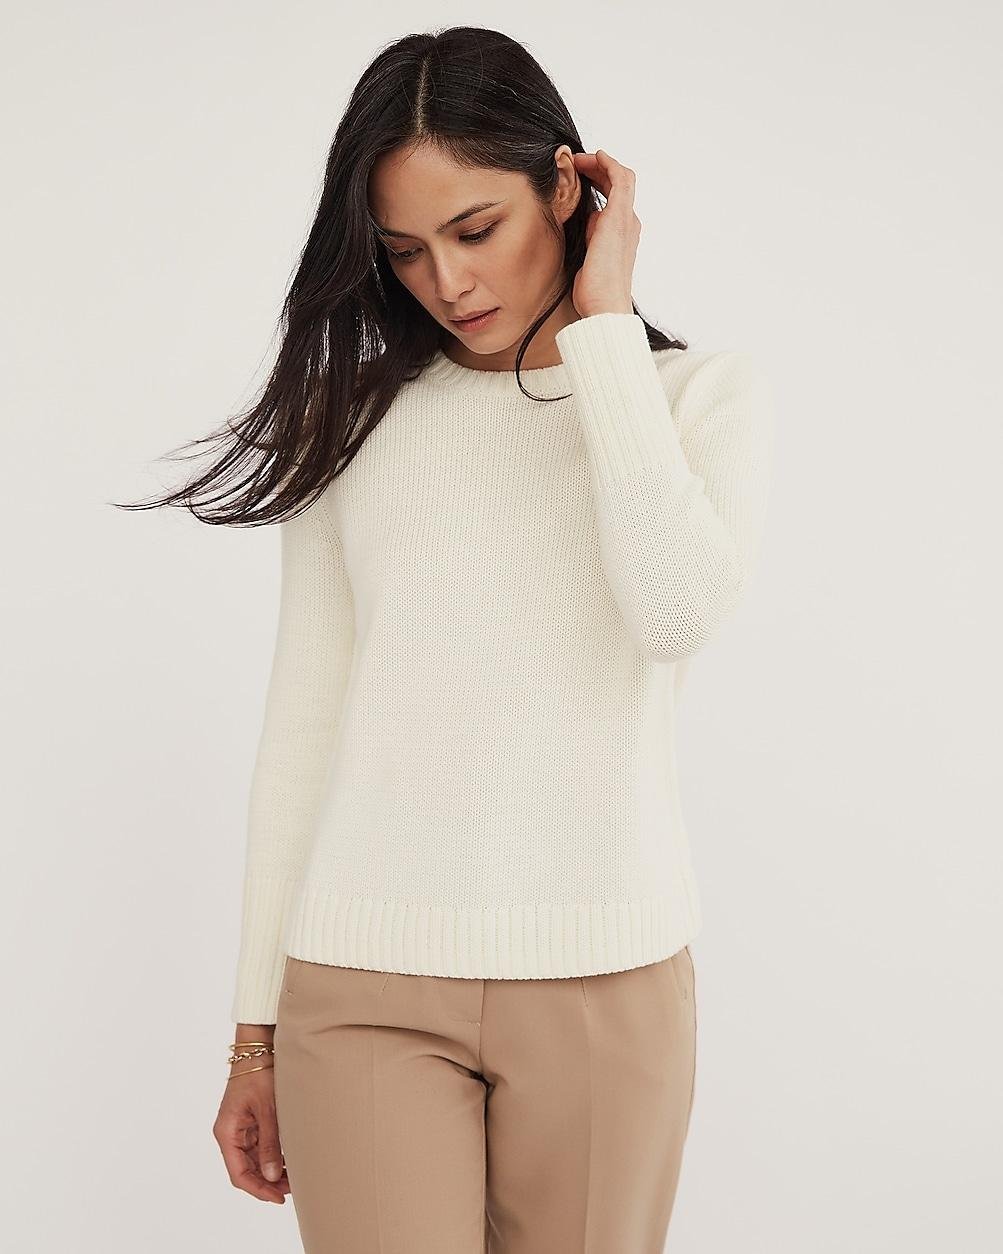 State of Cotton NYC Addison crewneck by J.CREW